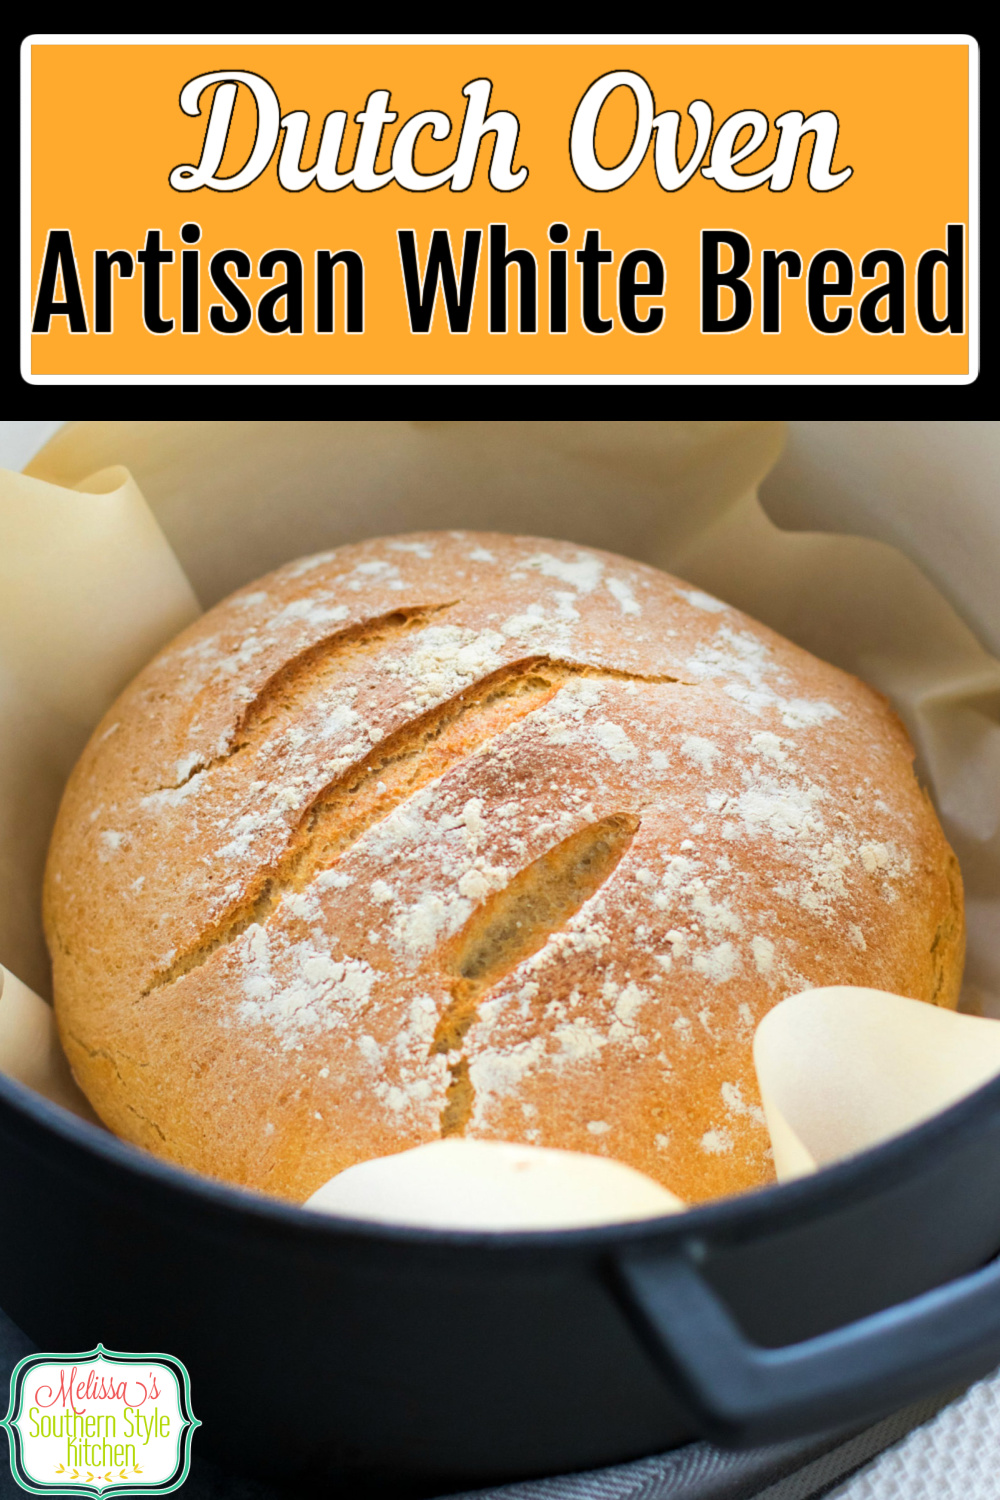 Make your own Dutch Oven Artisan White Bread at home for sandwiches, toast or as a delicious side kick for soups and stews #artisanbread #whitebread #breadrecipes #dutchovenbread #southernrecipes #southernfood #bread #dinnerideas #brunch #breakfast via @melissasssk